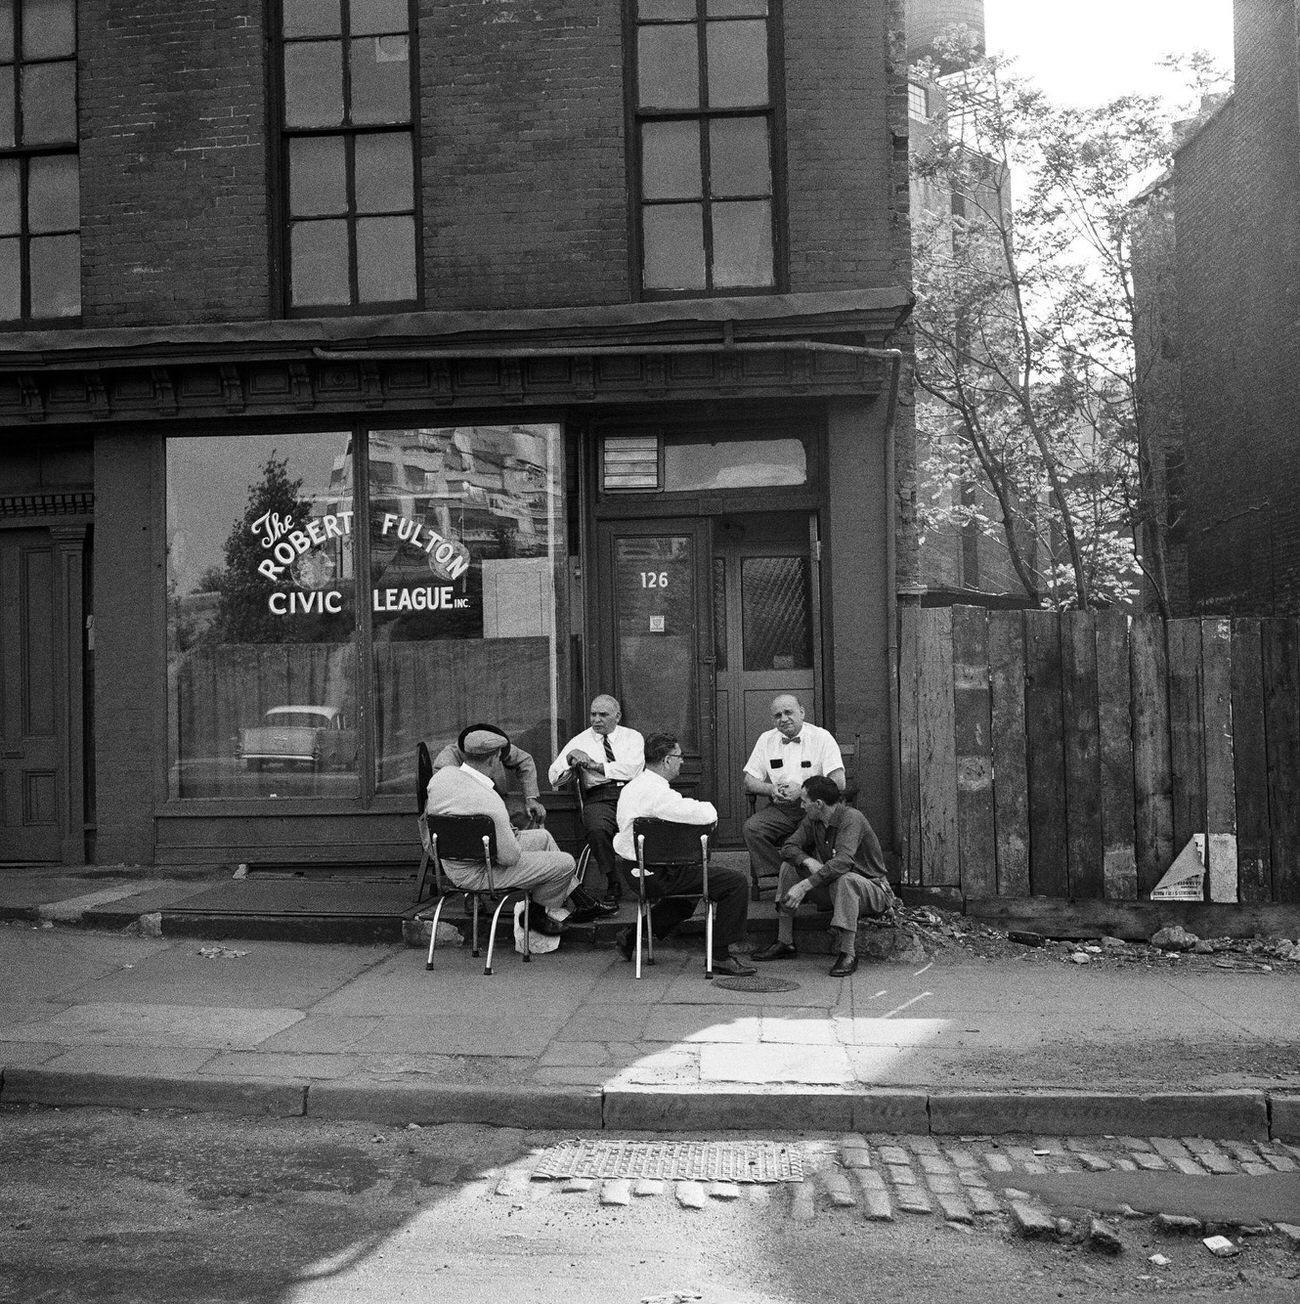 Men Socialize Outside The Robert Fulton Civic League In Brooklyn Heights, 1958.